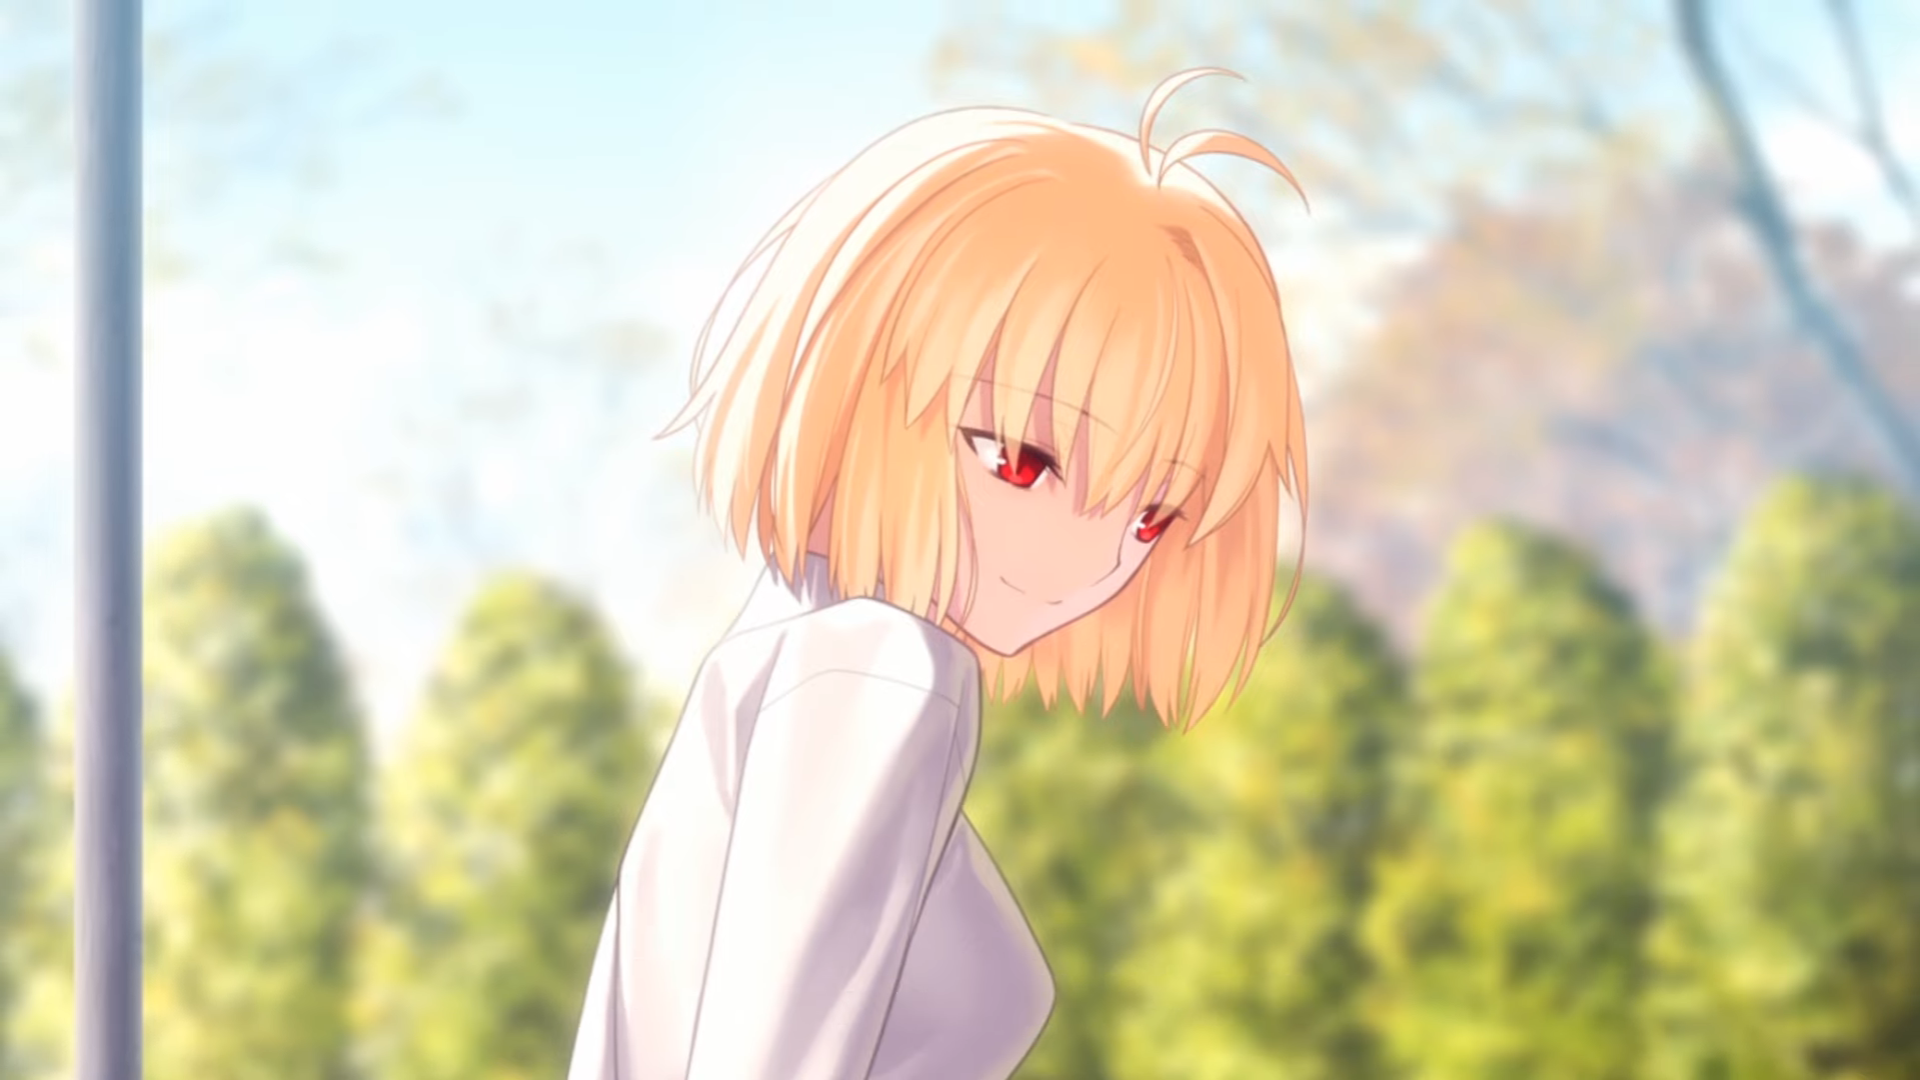 Tsukihime -A piece of blue glass moon- Western Release Reveals Second Trailer